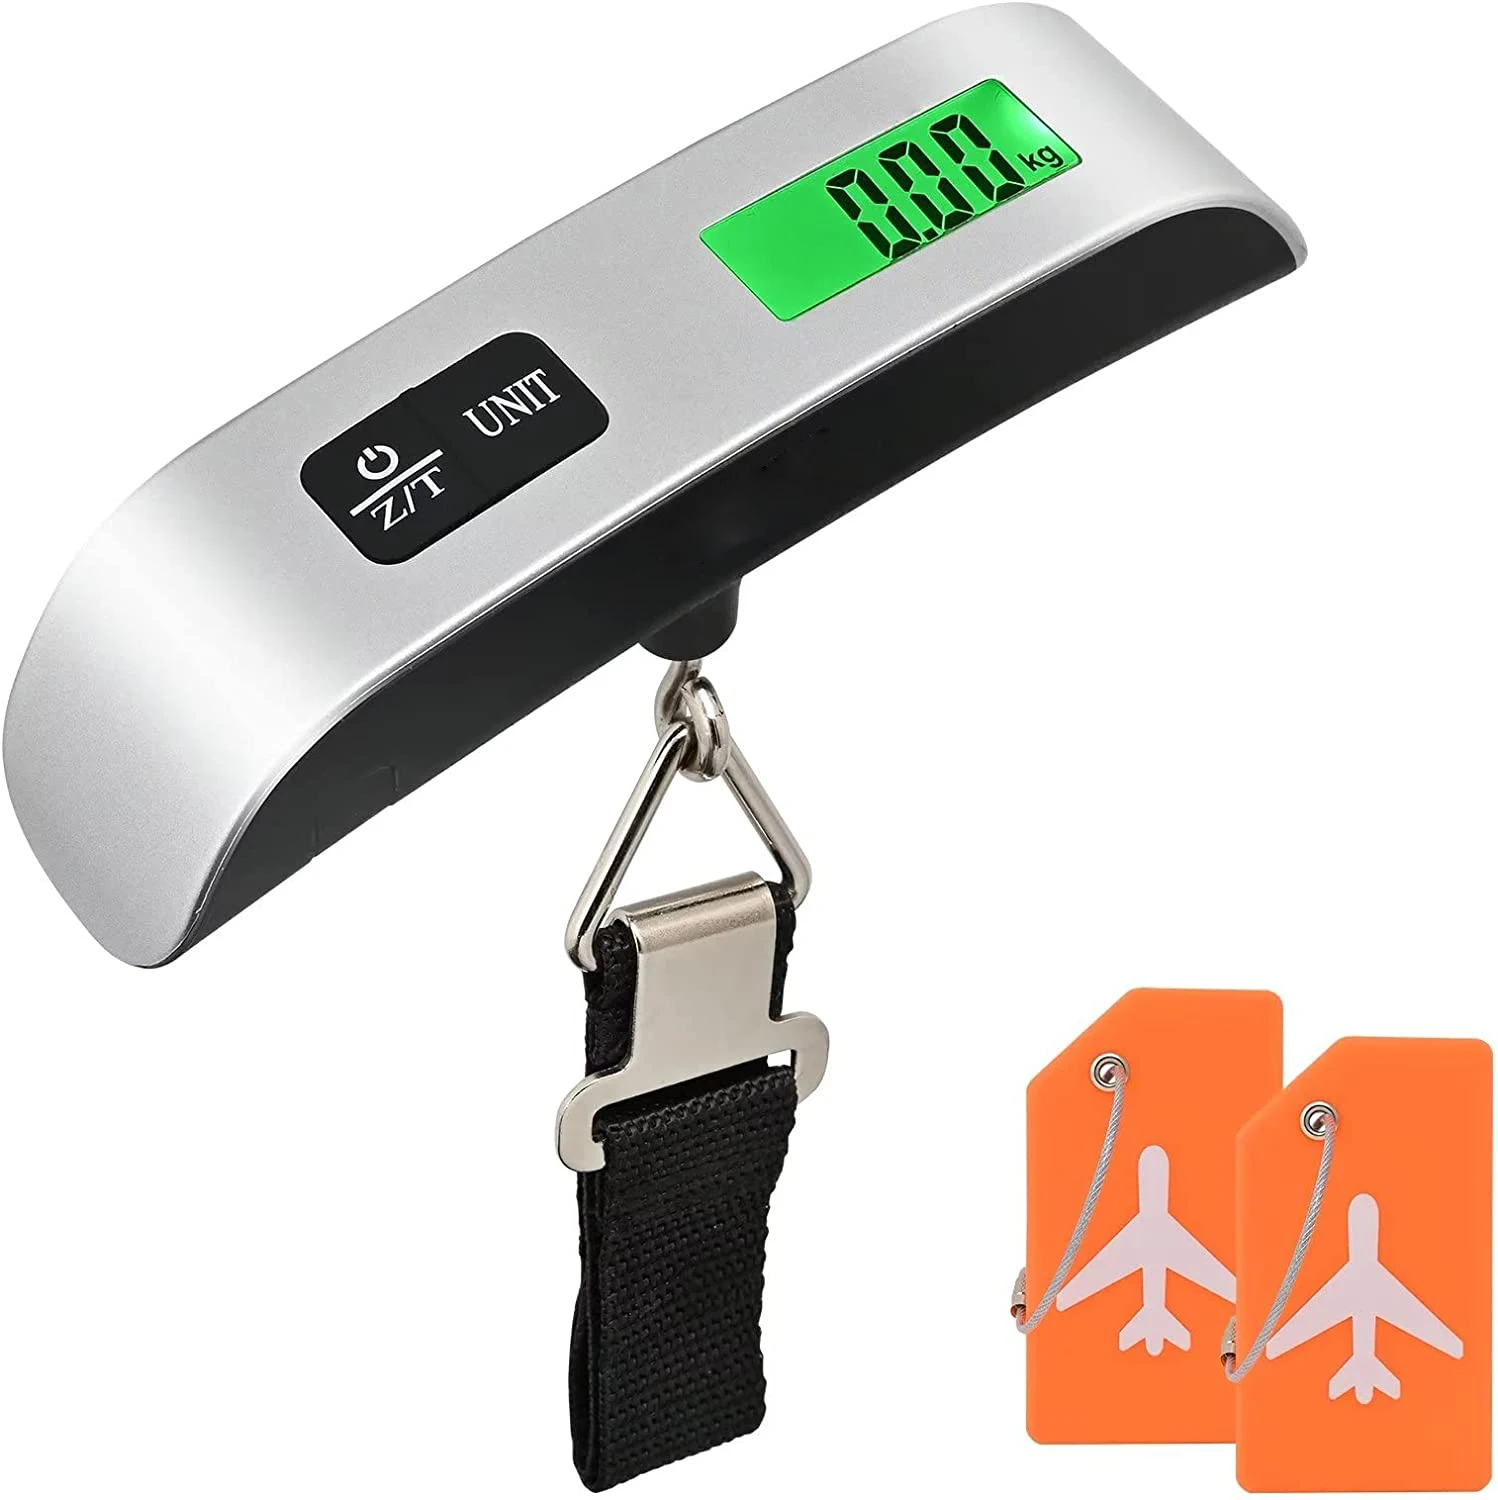 50 Kg Hand Weighing Scale Luggage With Temperature Sensor - Buy 50 Kg Hand Weighing  Scale Luggage With Temperature Sensor Product on